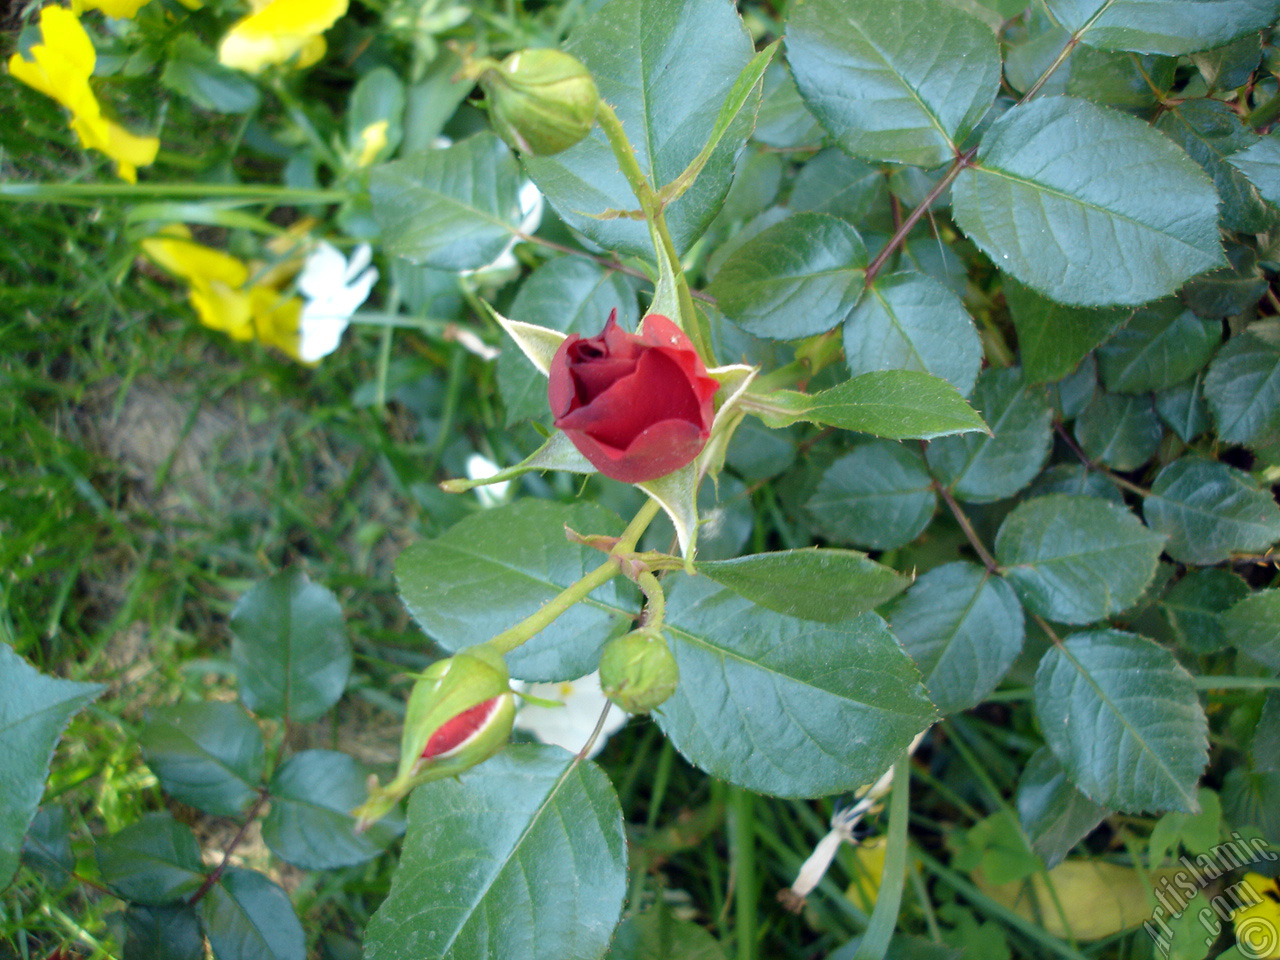 Red rose photo.
